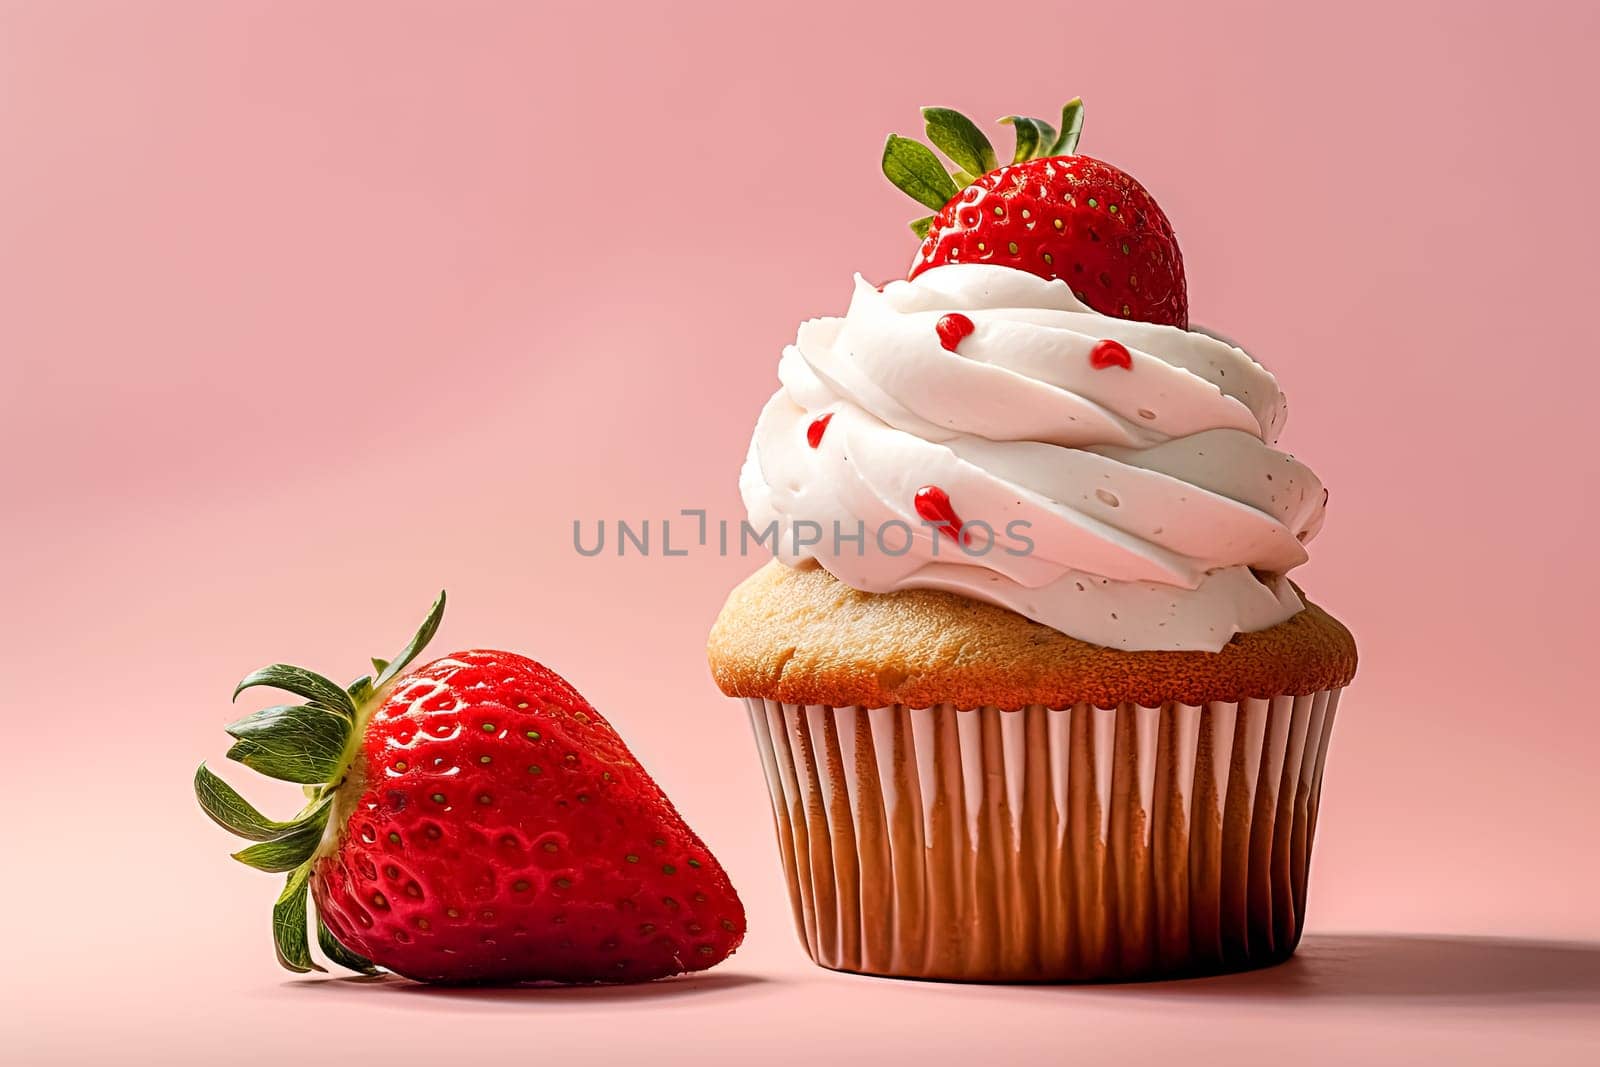 A strawberry and a cupcake are placed on a pink background. The cupcake is topped with frosting and has a strawberry on top. Concept of indulgence and sweetness, as the cupcake